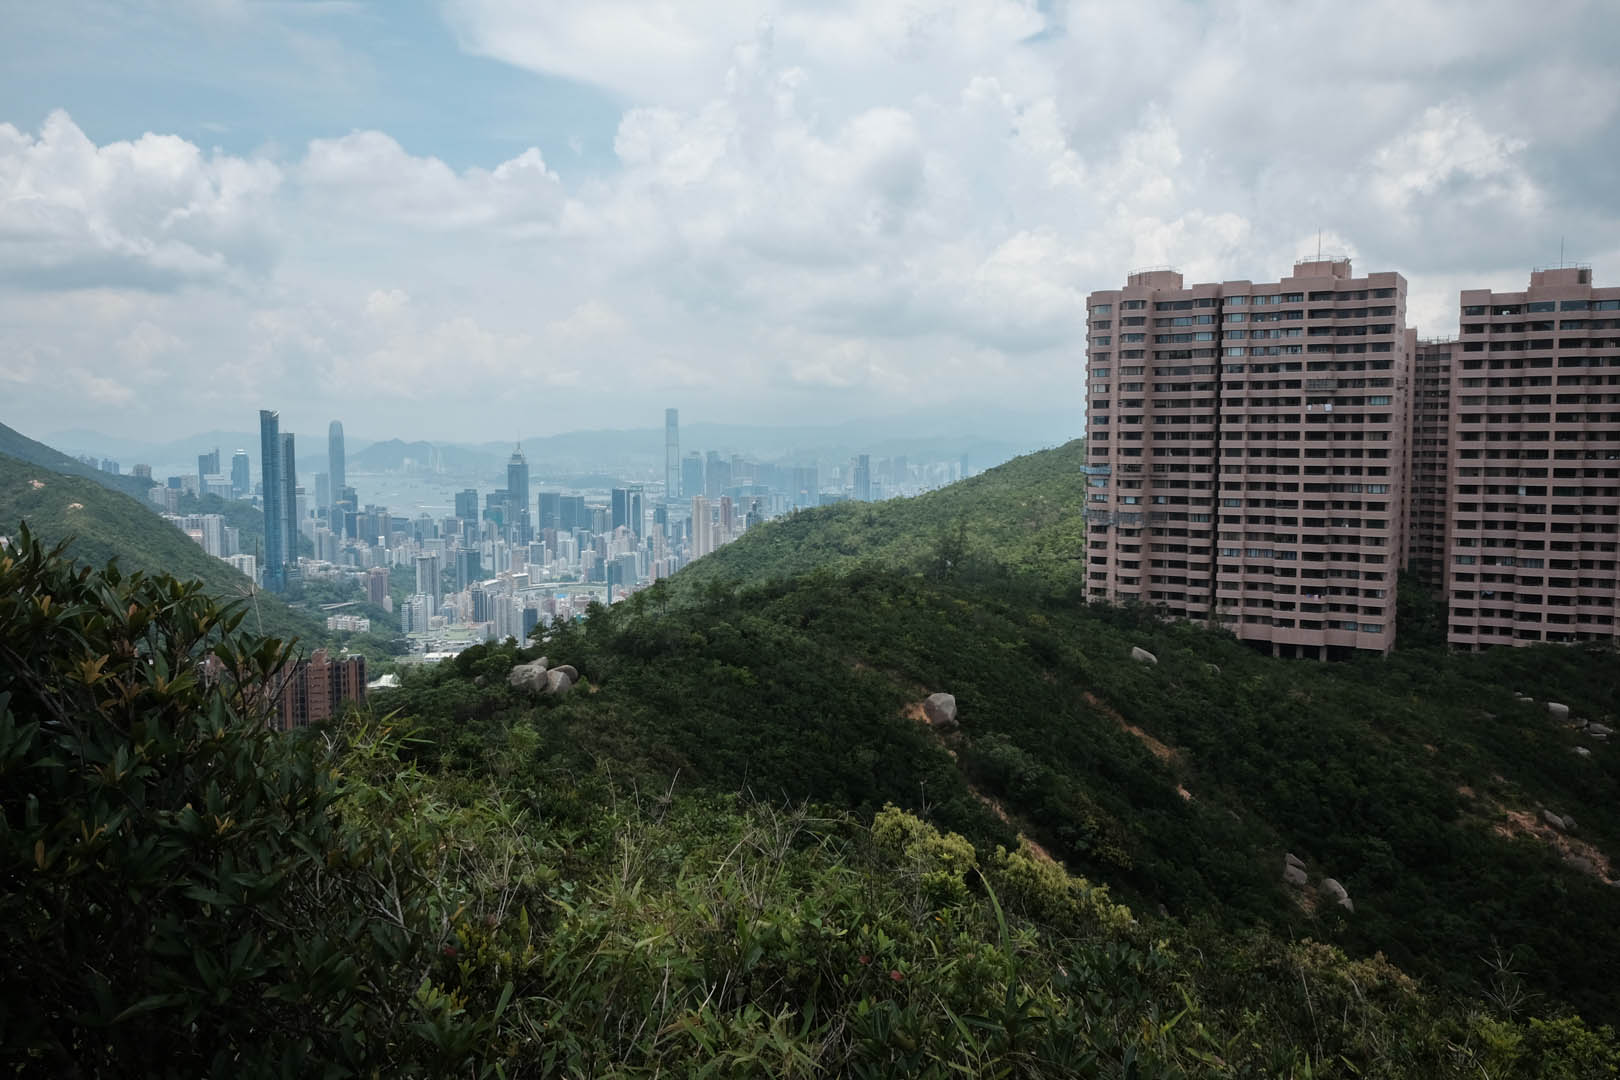 View of Parkview Heights and Island cityscape from the initial ascent to Violet Hill from Wong Nai Chung Reservoir